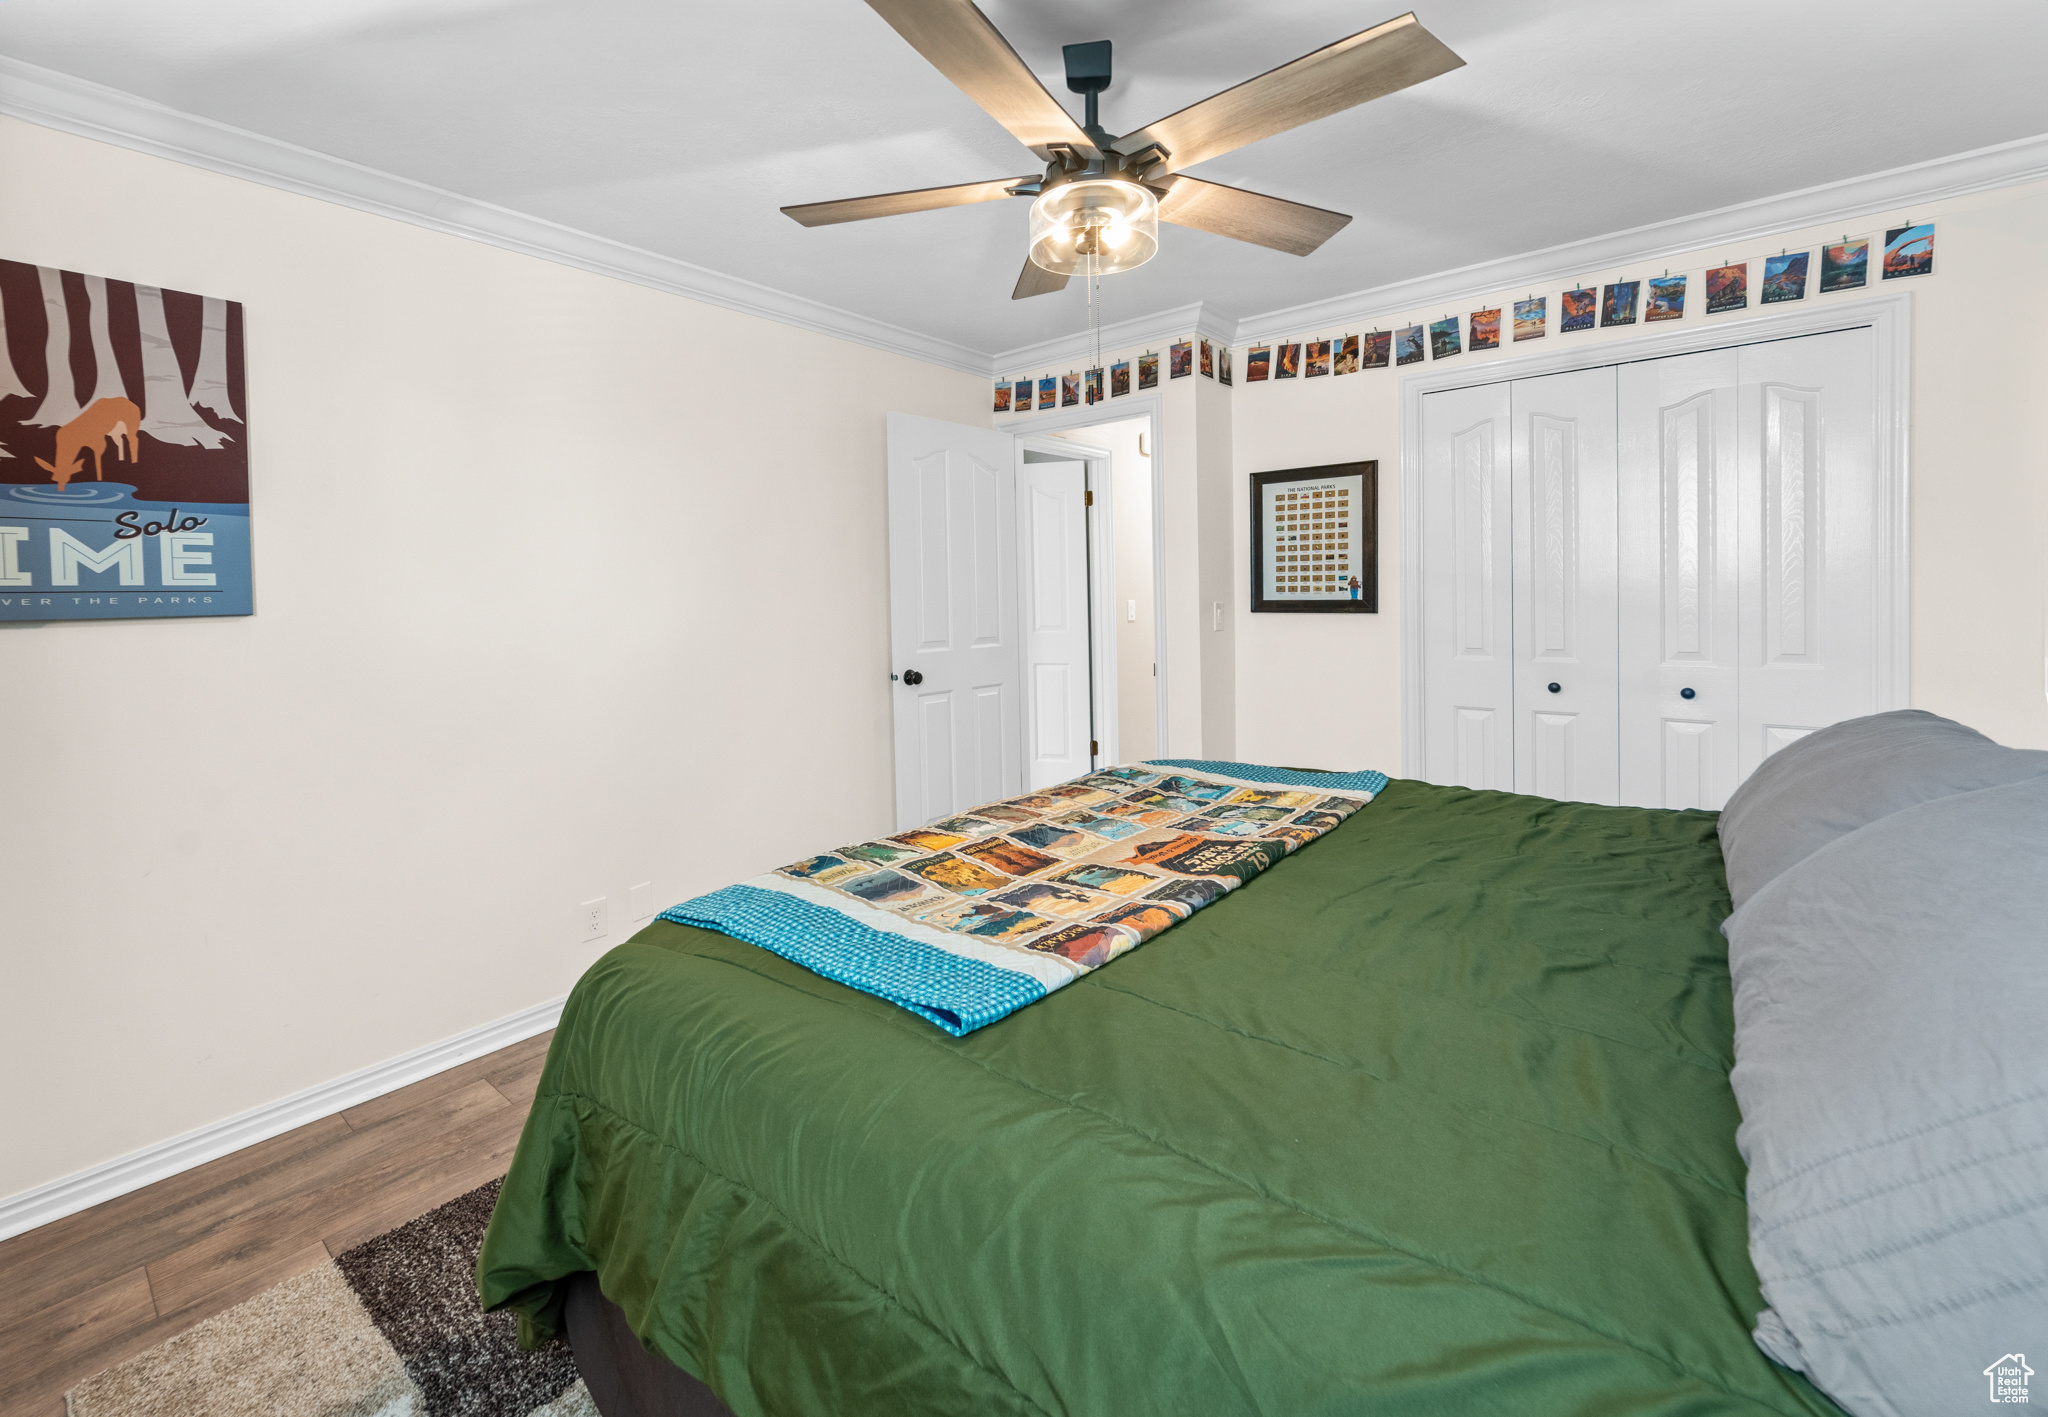 Bedroom with ceiling fan, a closet, ornamental molding